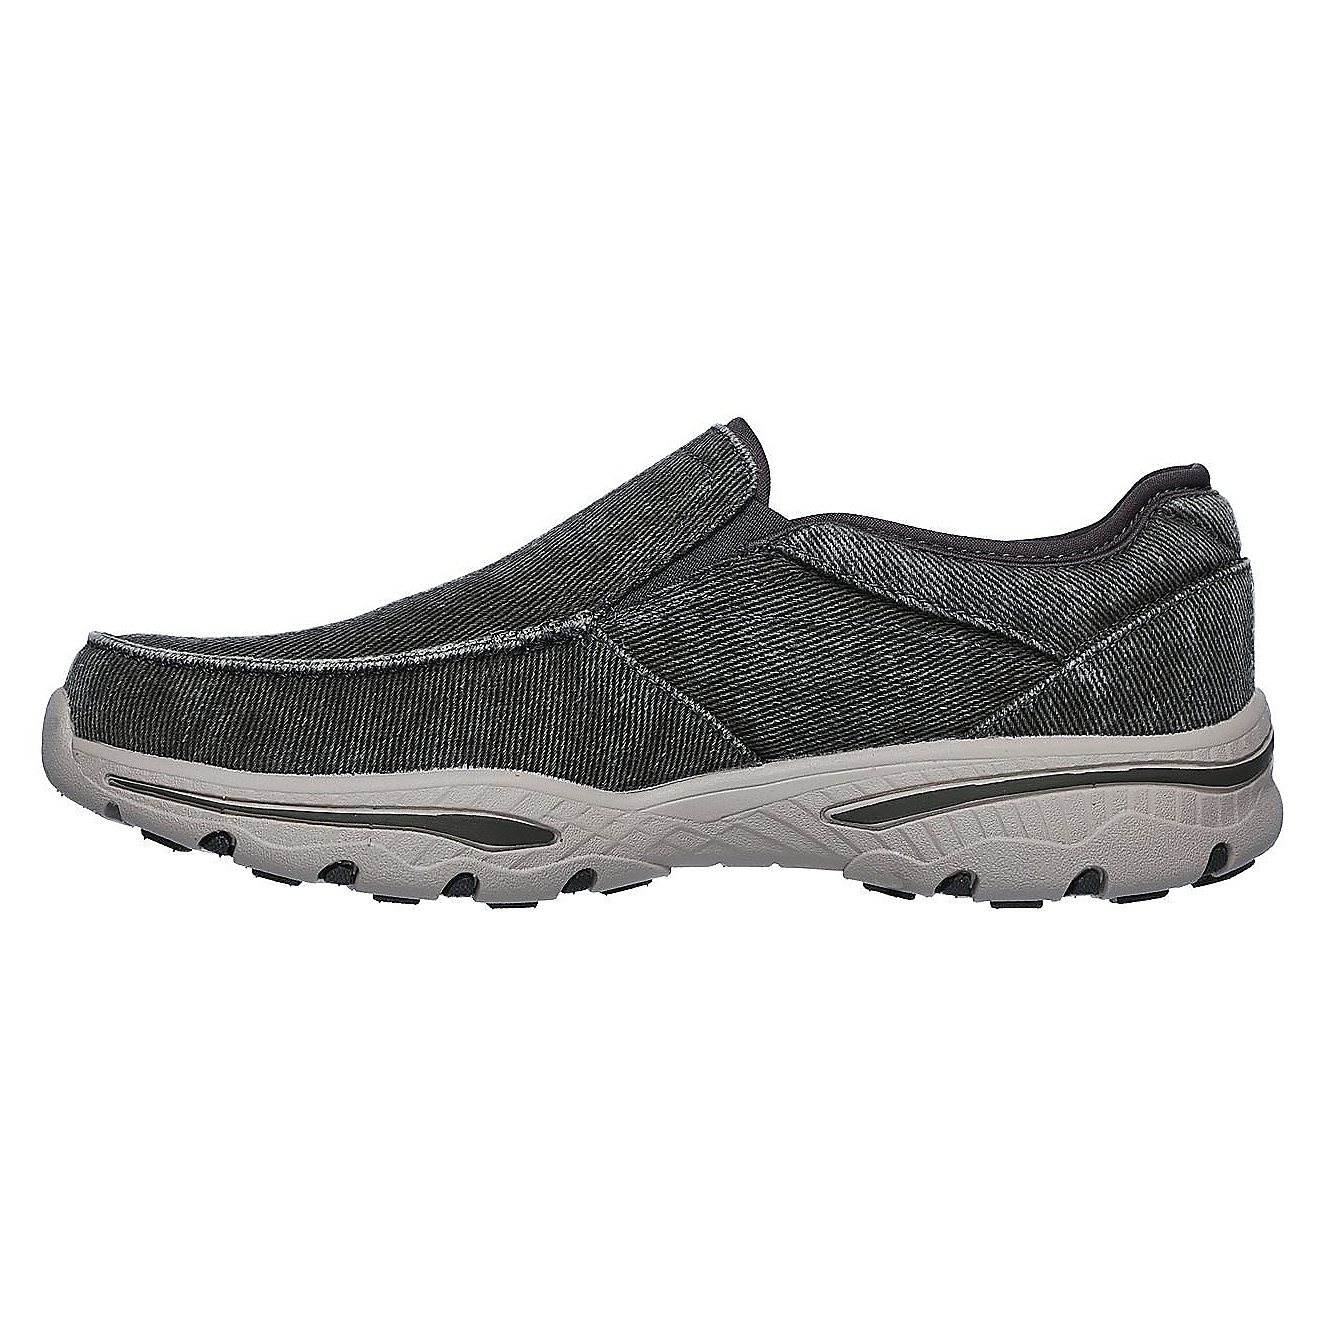 SKECHERS Men's Creston Moseco Shoes | Free Shipping at Academy